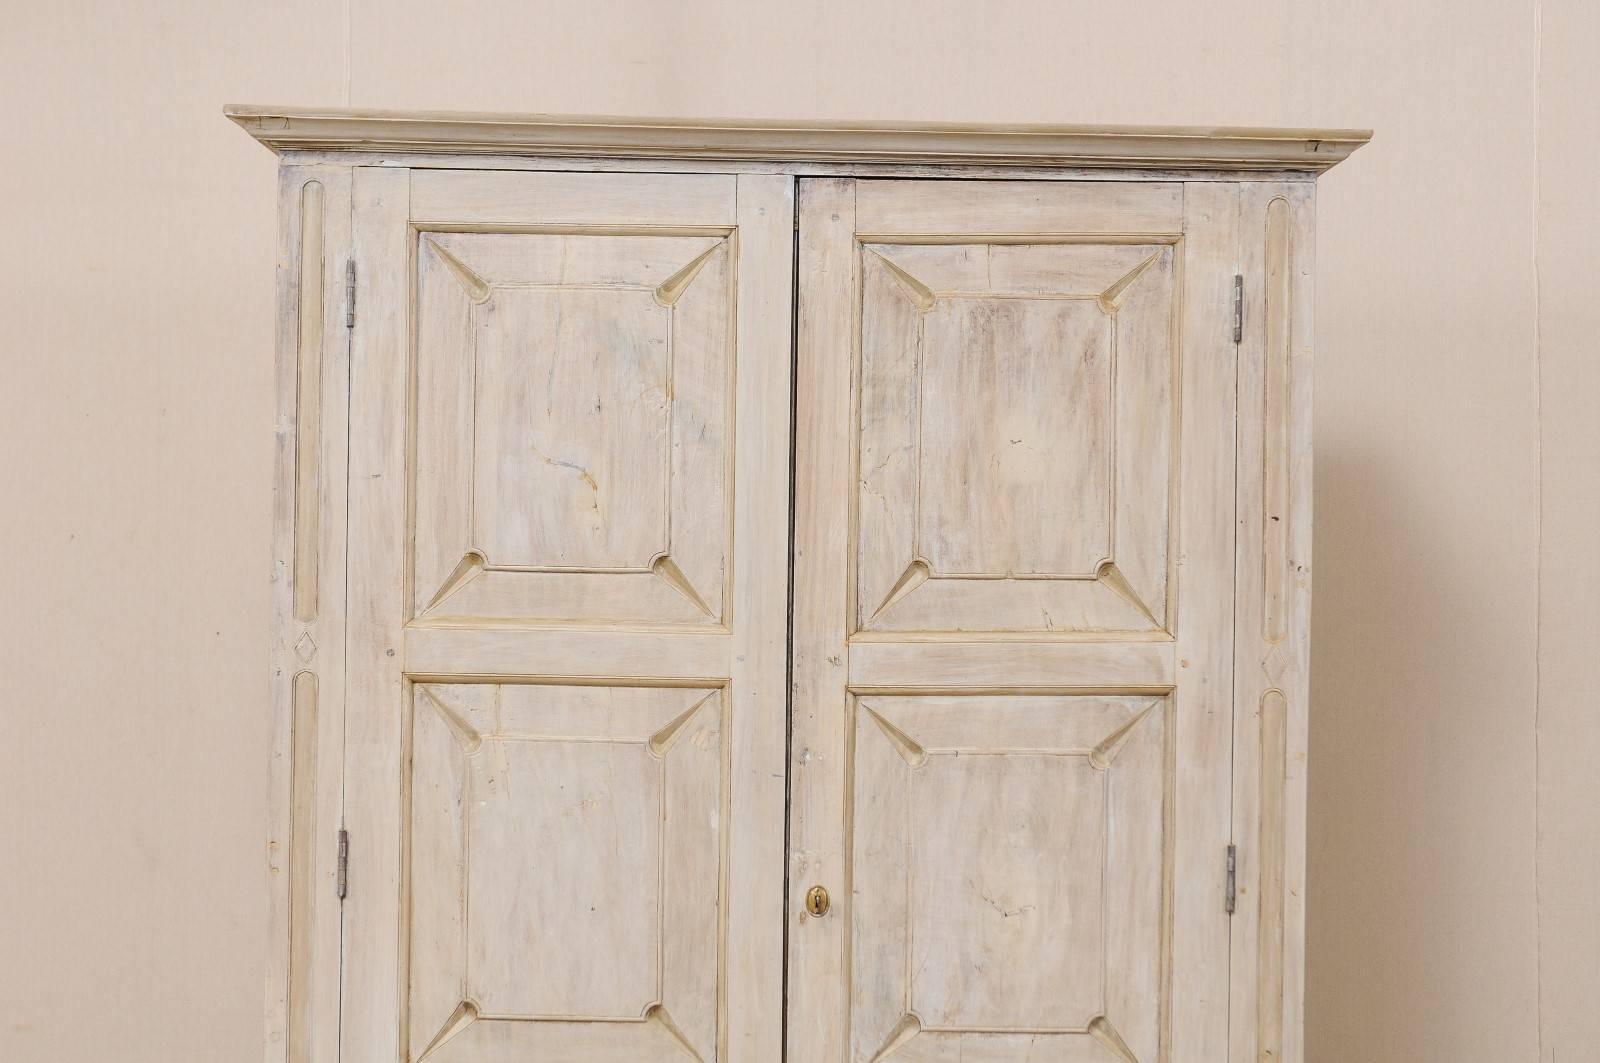 Indian Single Two-Sided Early 20th Century British Colonial Two-Door Painted Cabinet